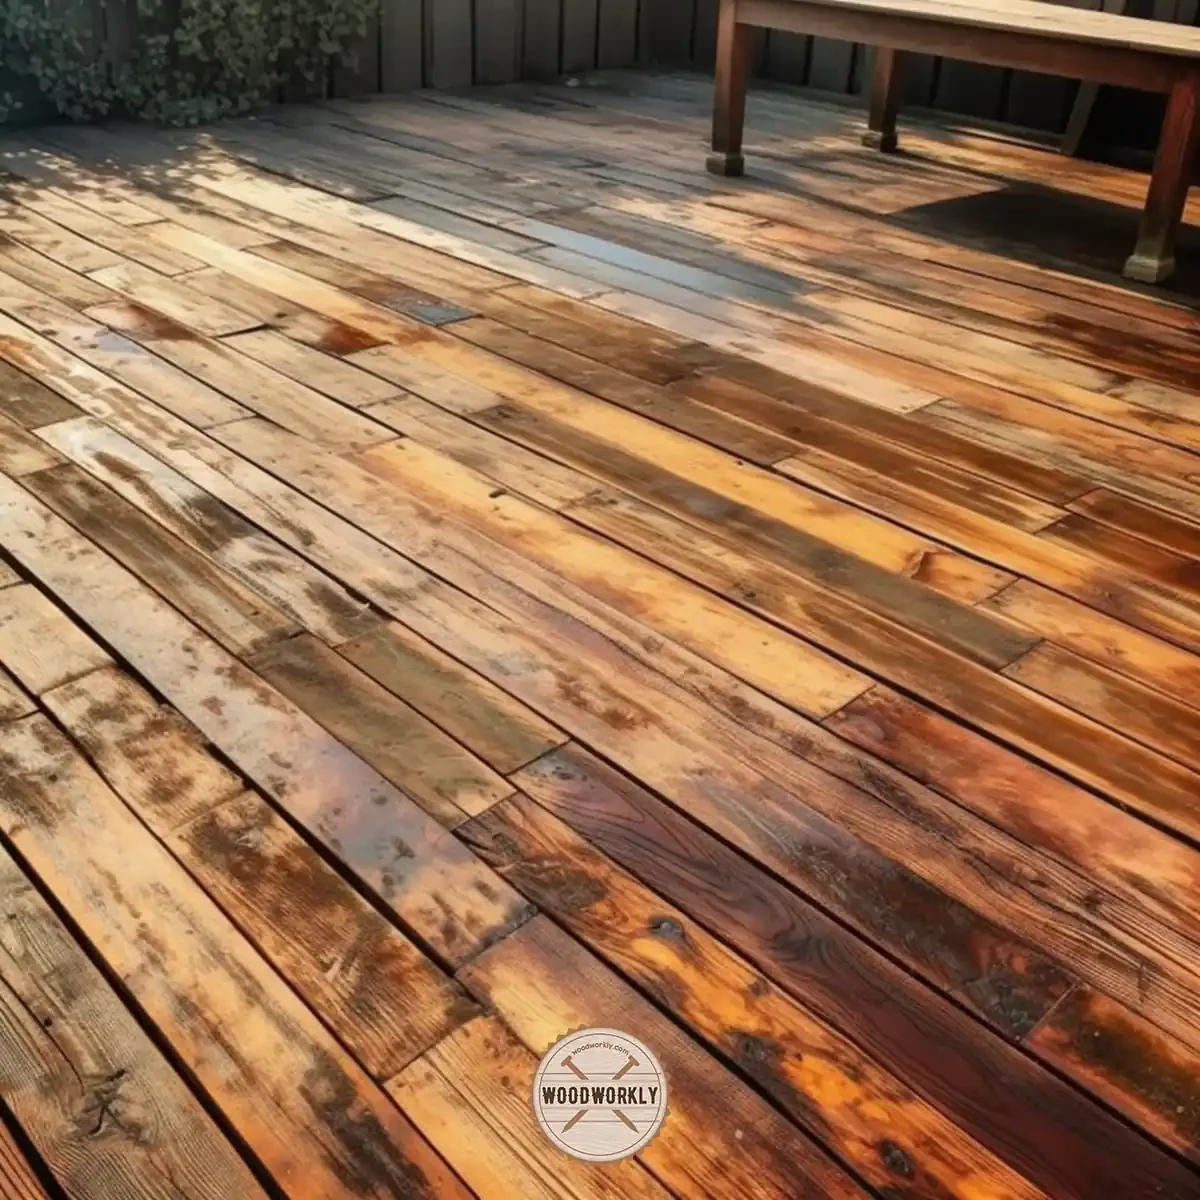 wooden floor with uneven wood stain surface